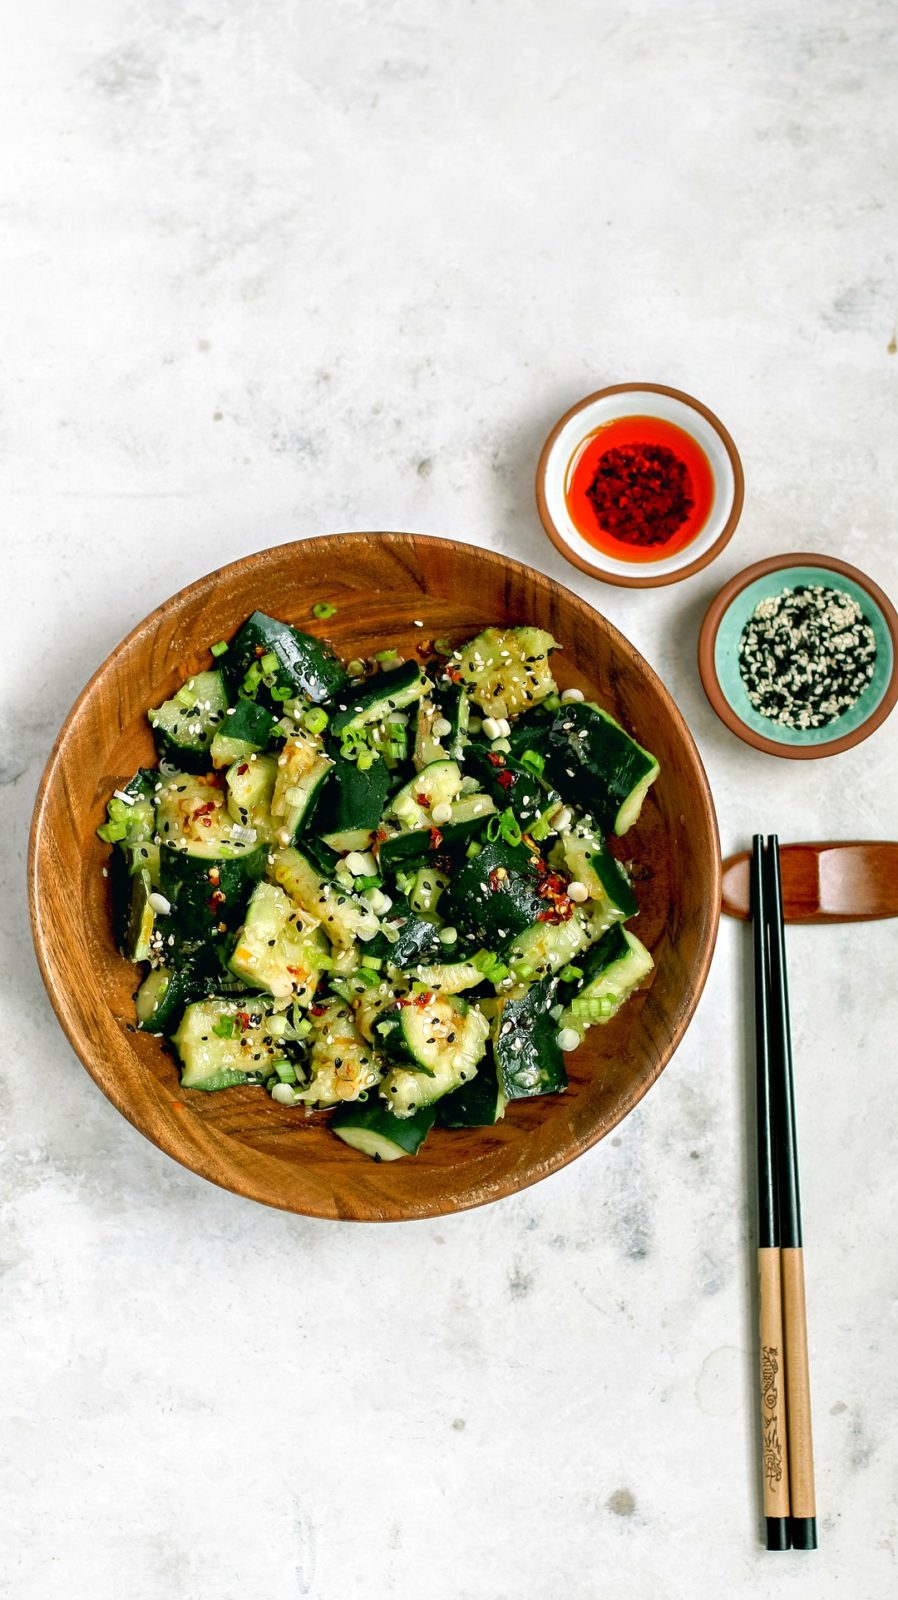 Sichuan Smashed Cucumbers with hot chili oil in a bowl.